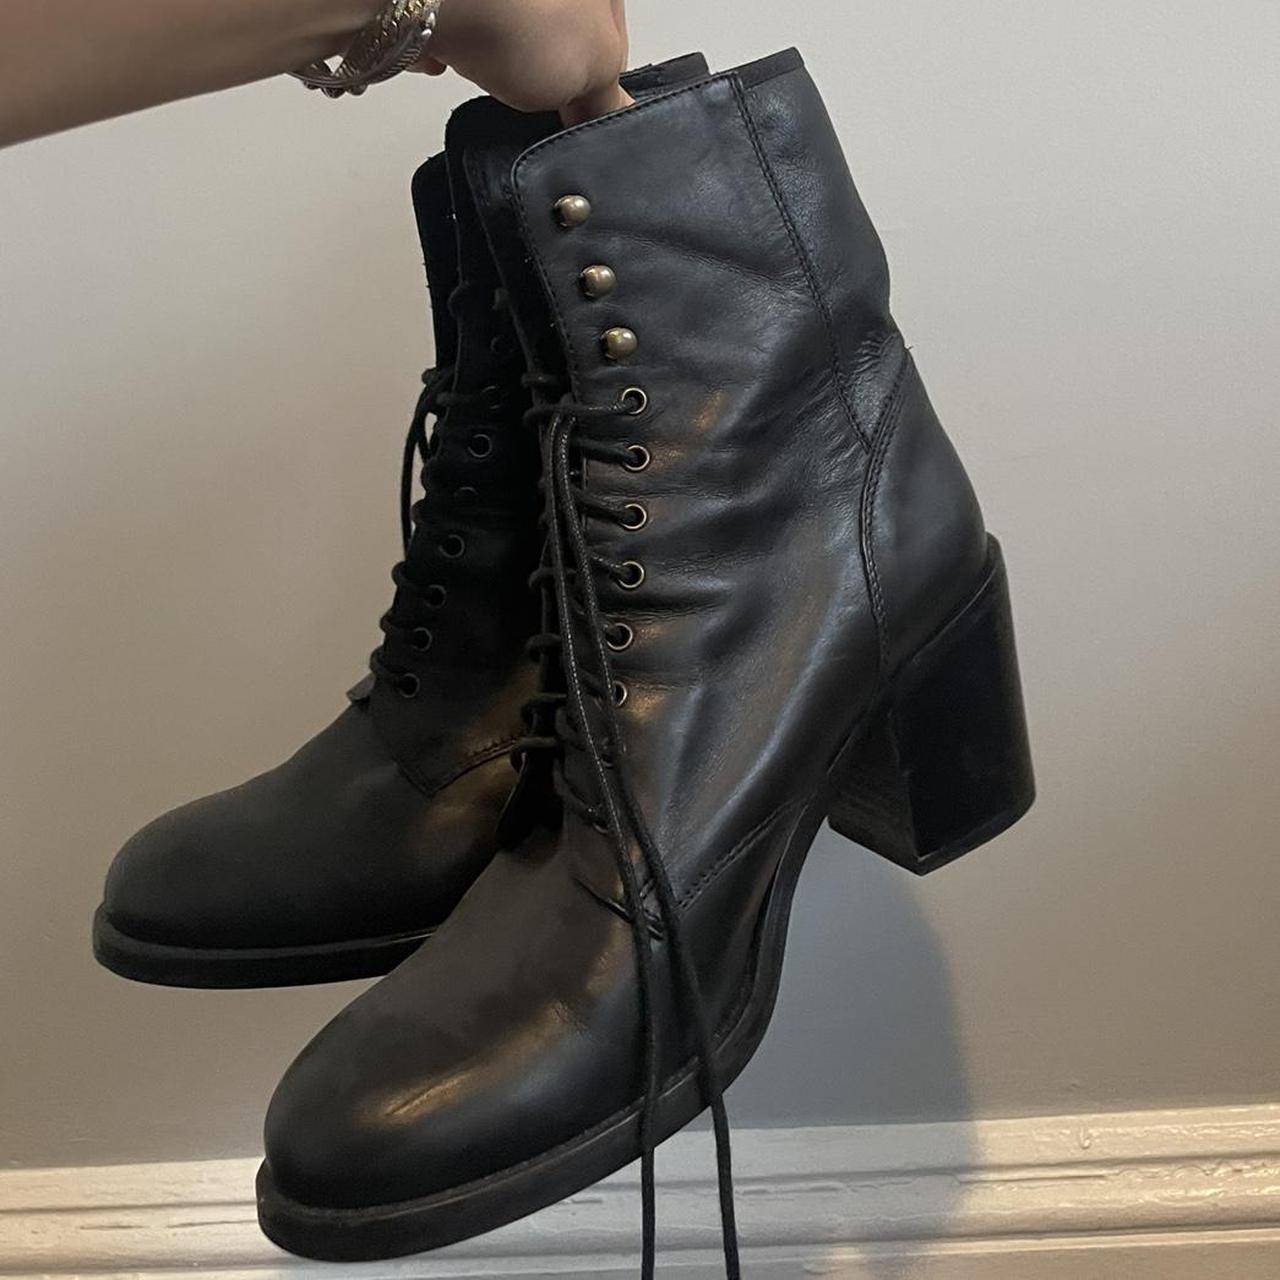 Product Image 4 - BELSTAFF LEATHER ENGLAND BOOTS

made in